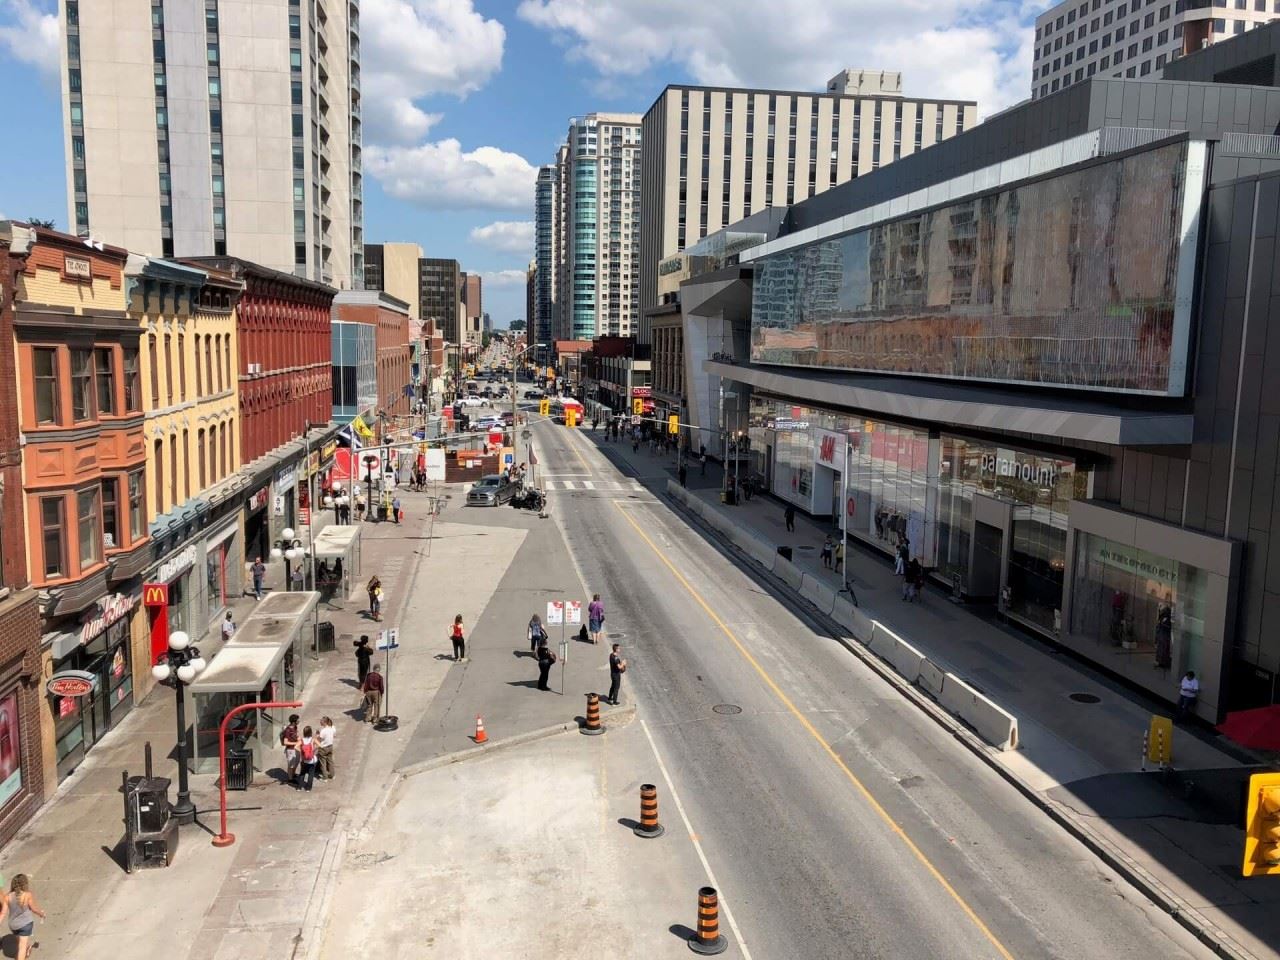 Rideau Street with the Rideau Centre to the right and the station entrance kiosk to the left.